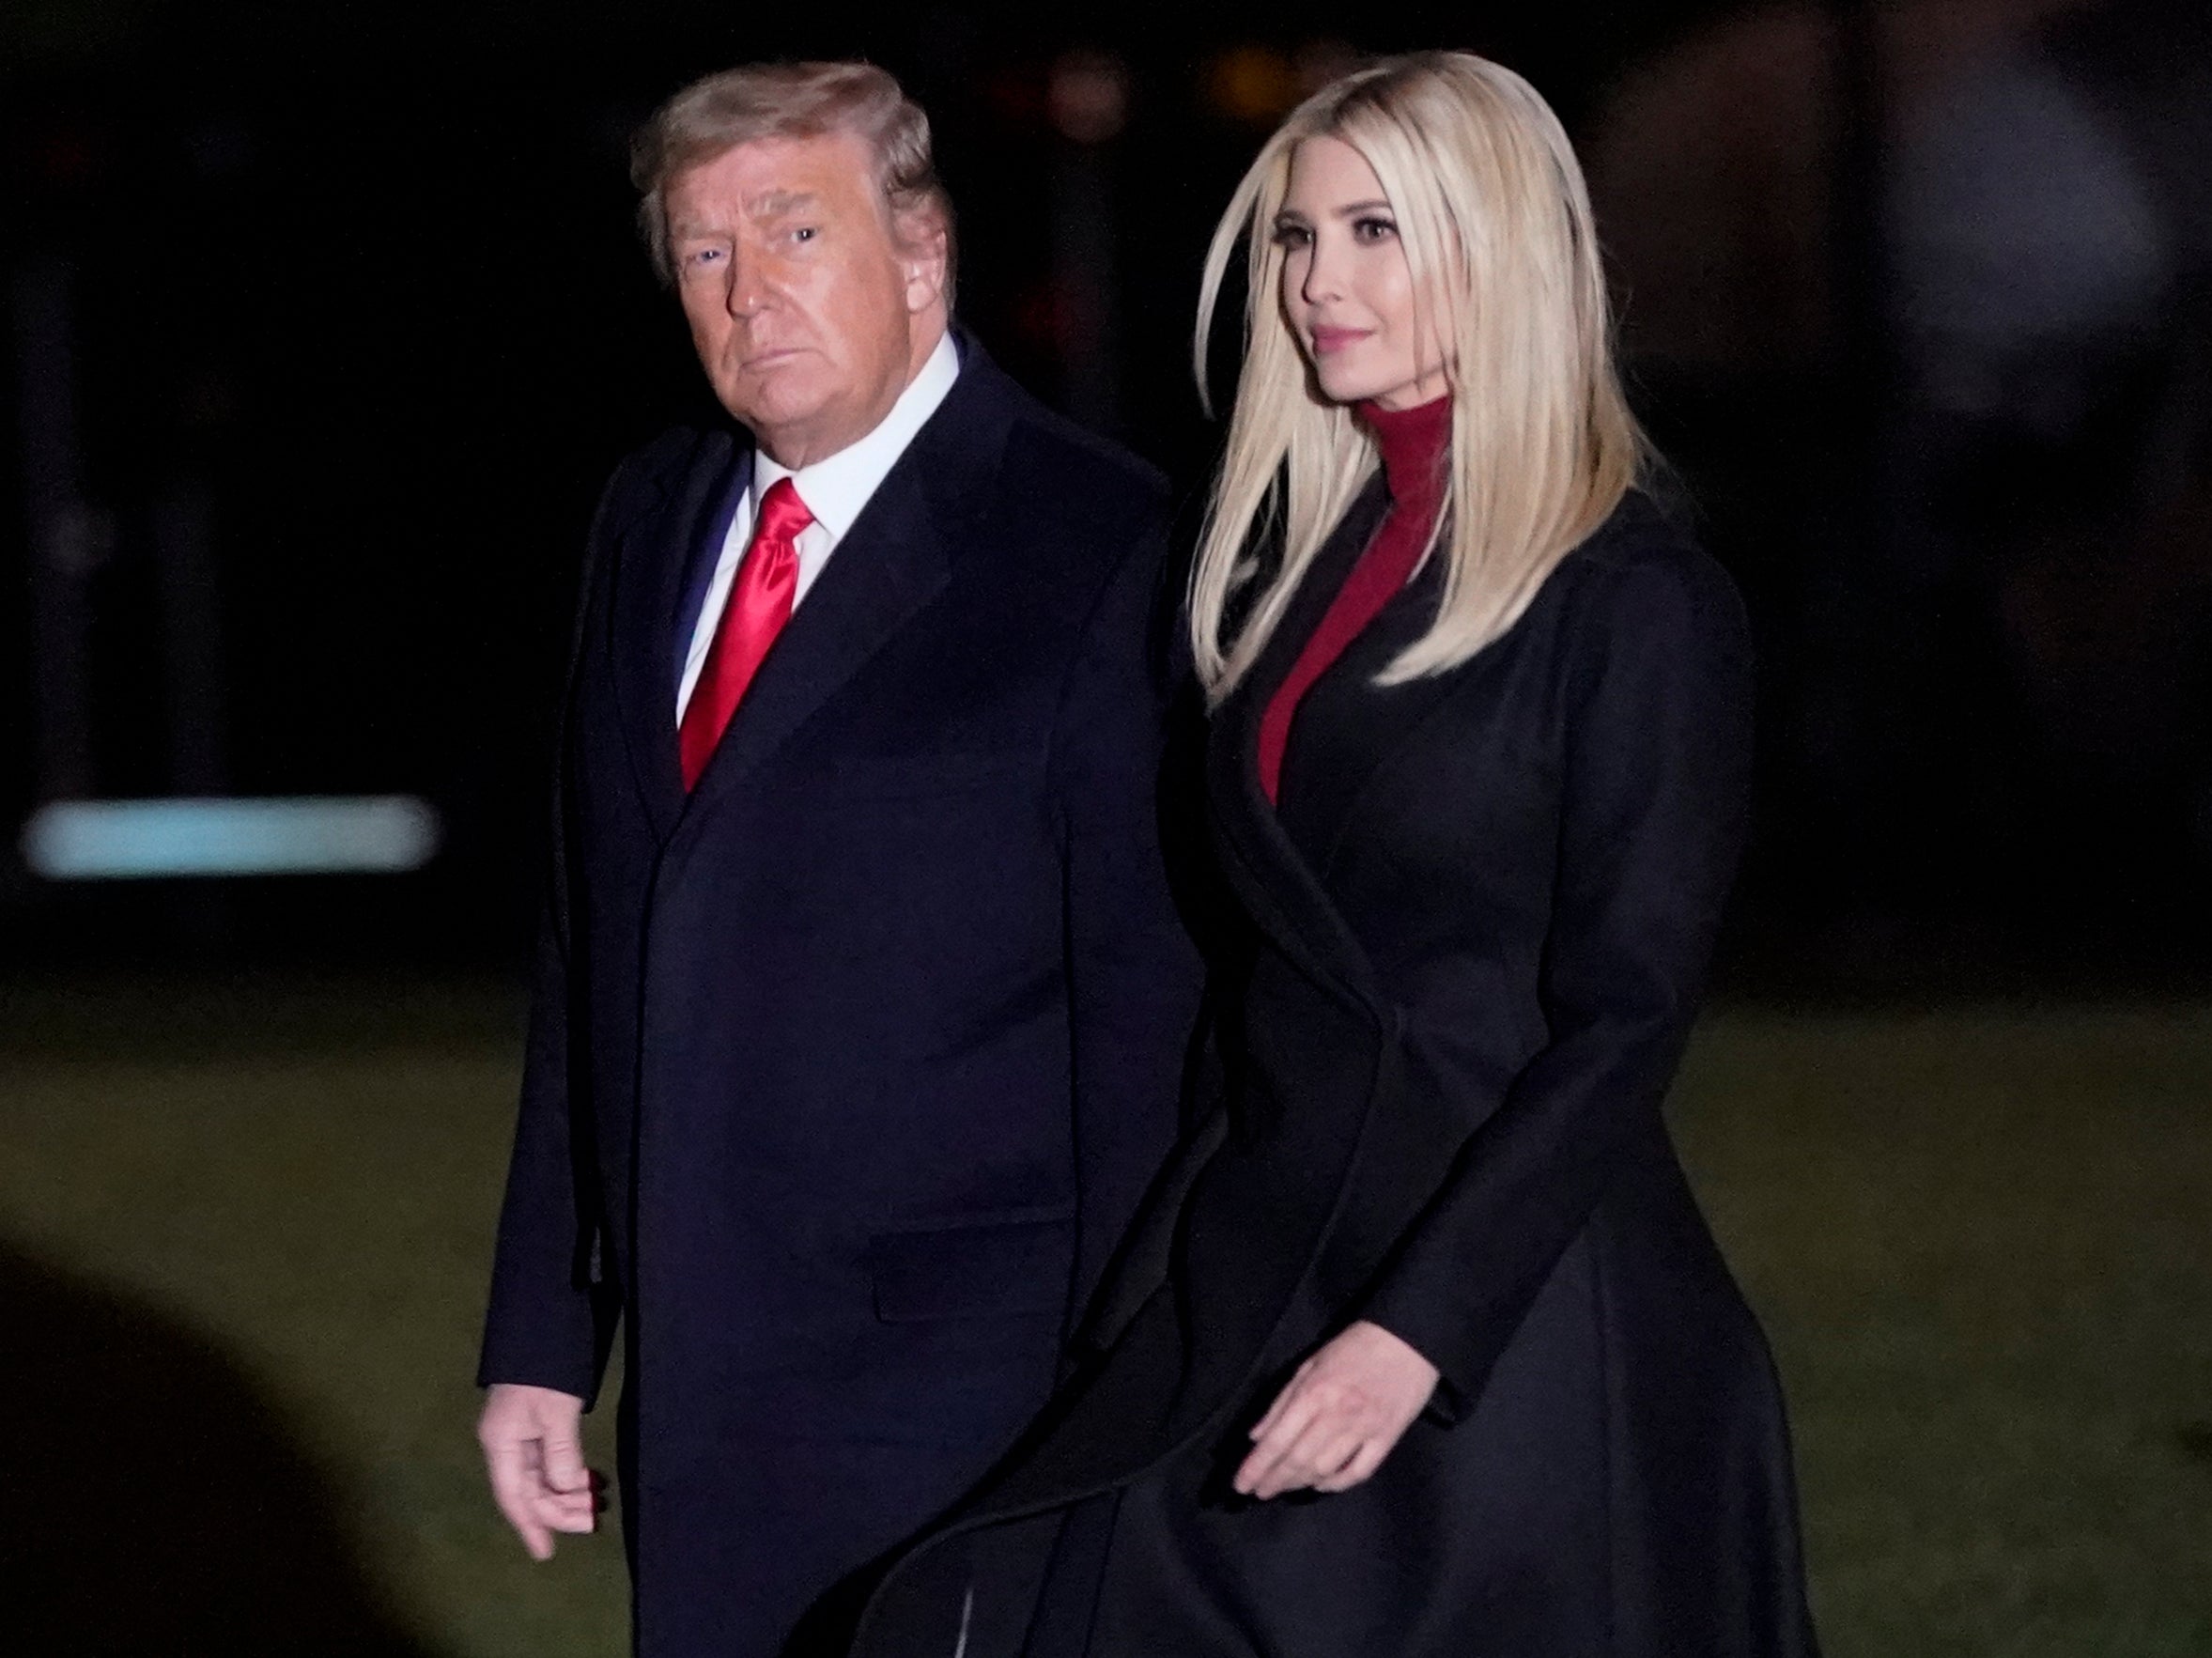 Ivanka Trump visited dad Donald before his arrest in New York, report says  | The Independent